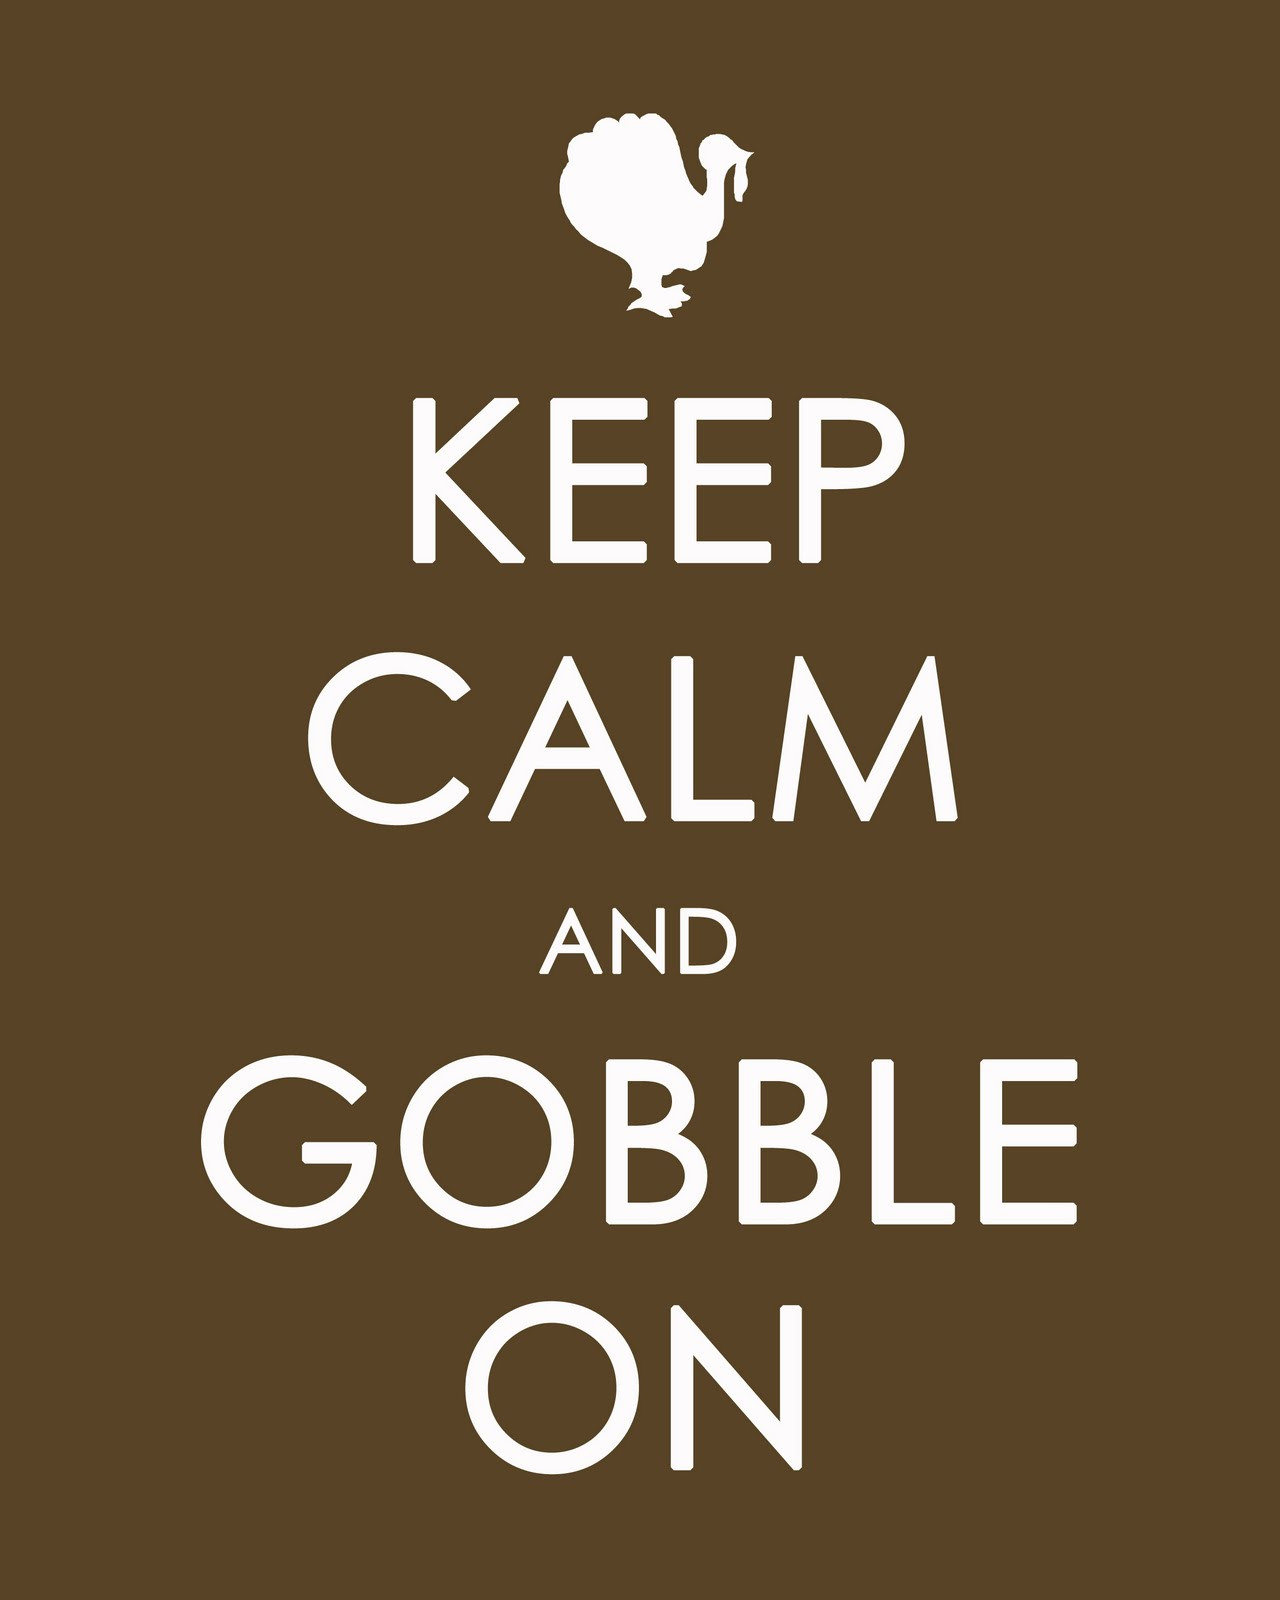 Thanksgiving Turkey Quotes
 THE ADVENTURES OF TEAM DANGER Keeping Calm